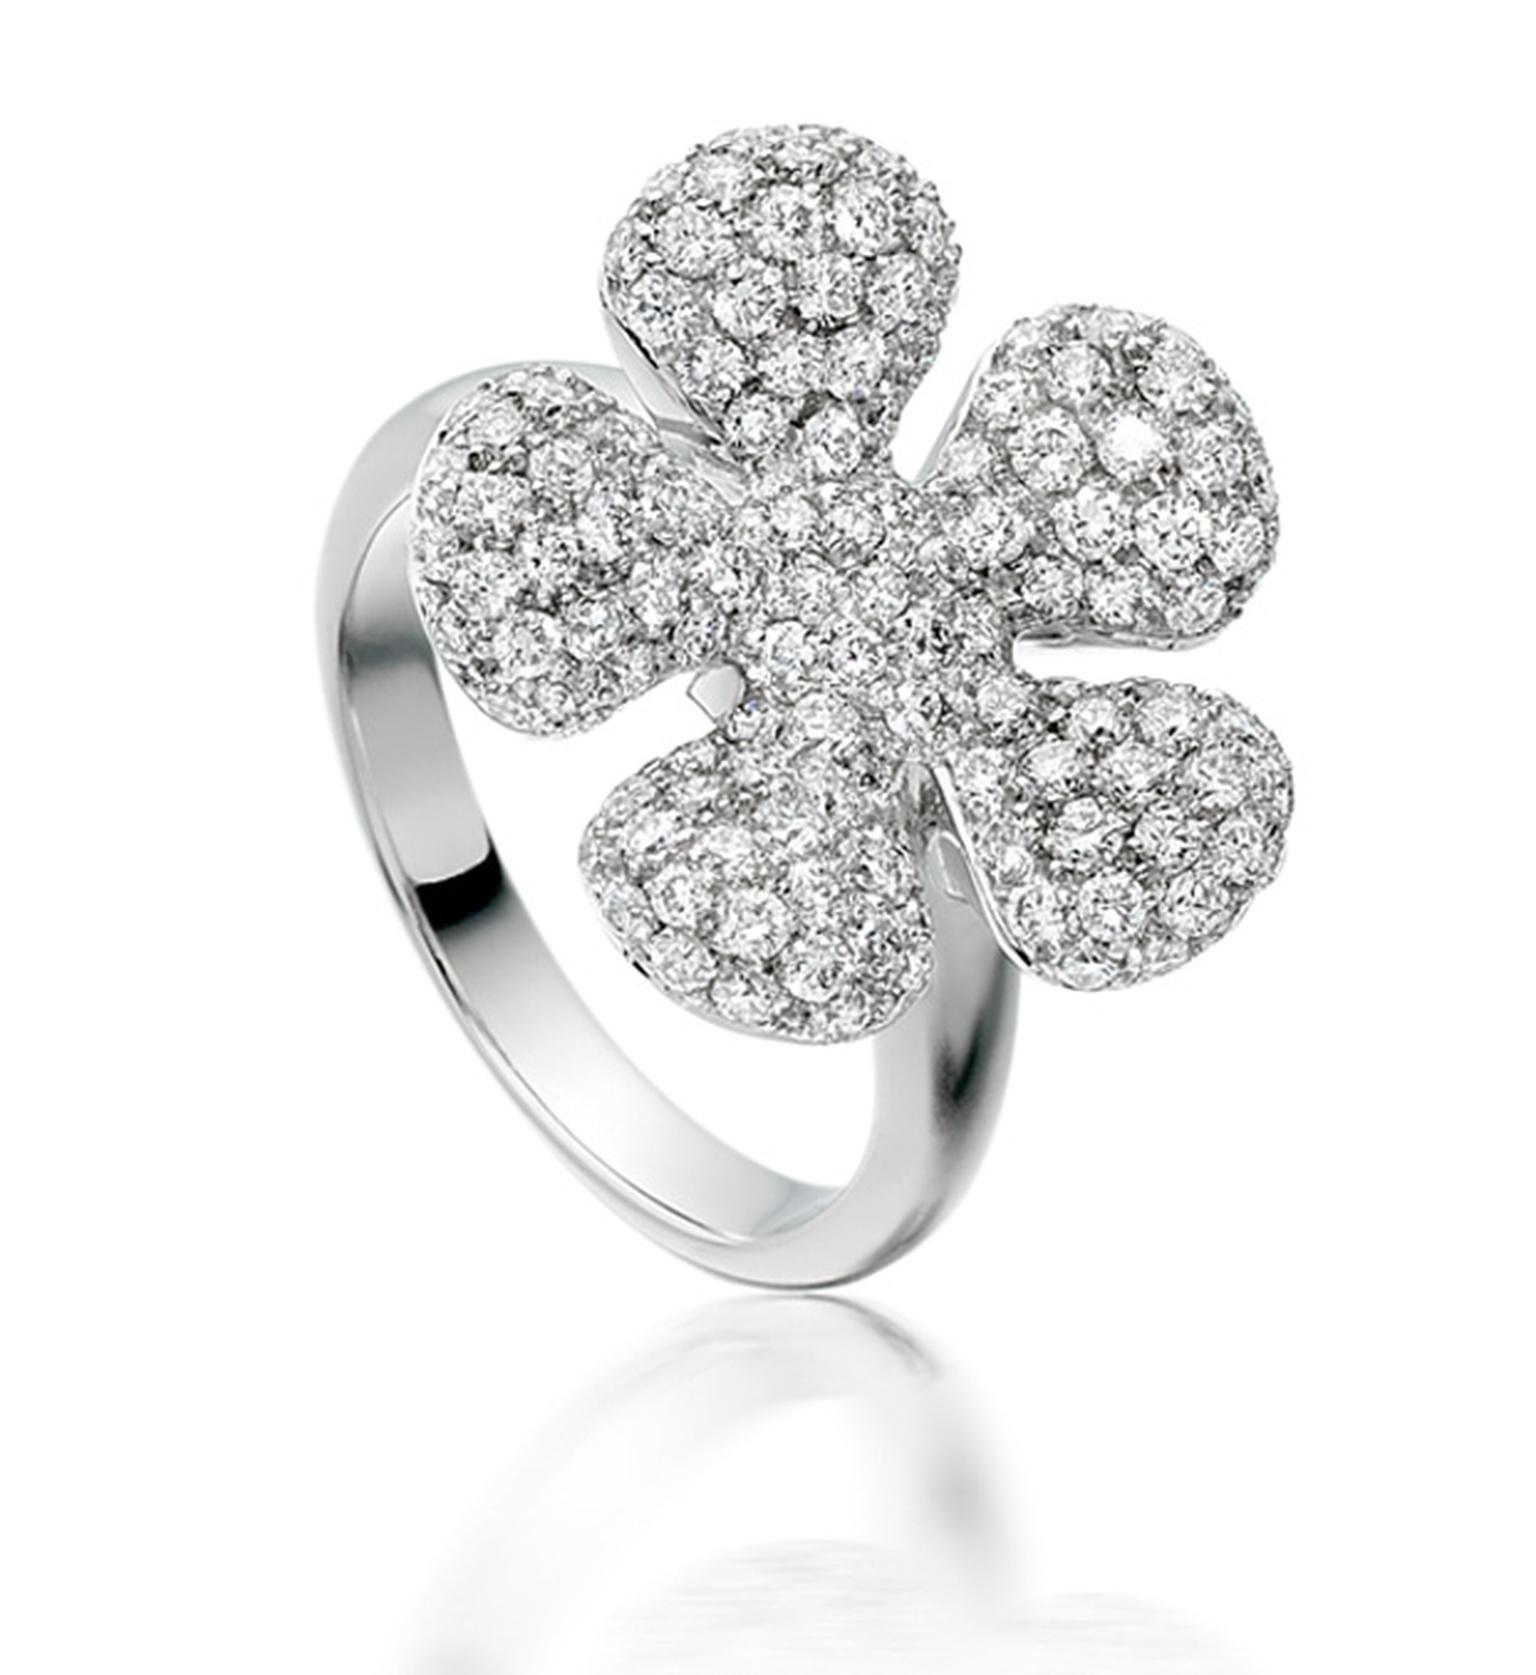 Astley Clarke Forget Me Not ring